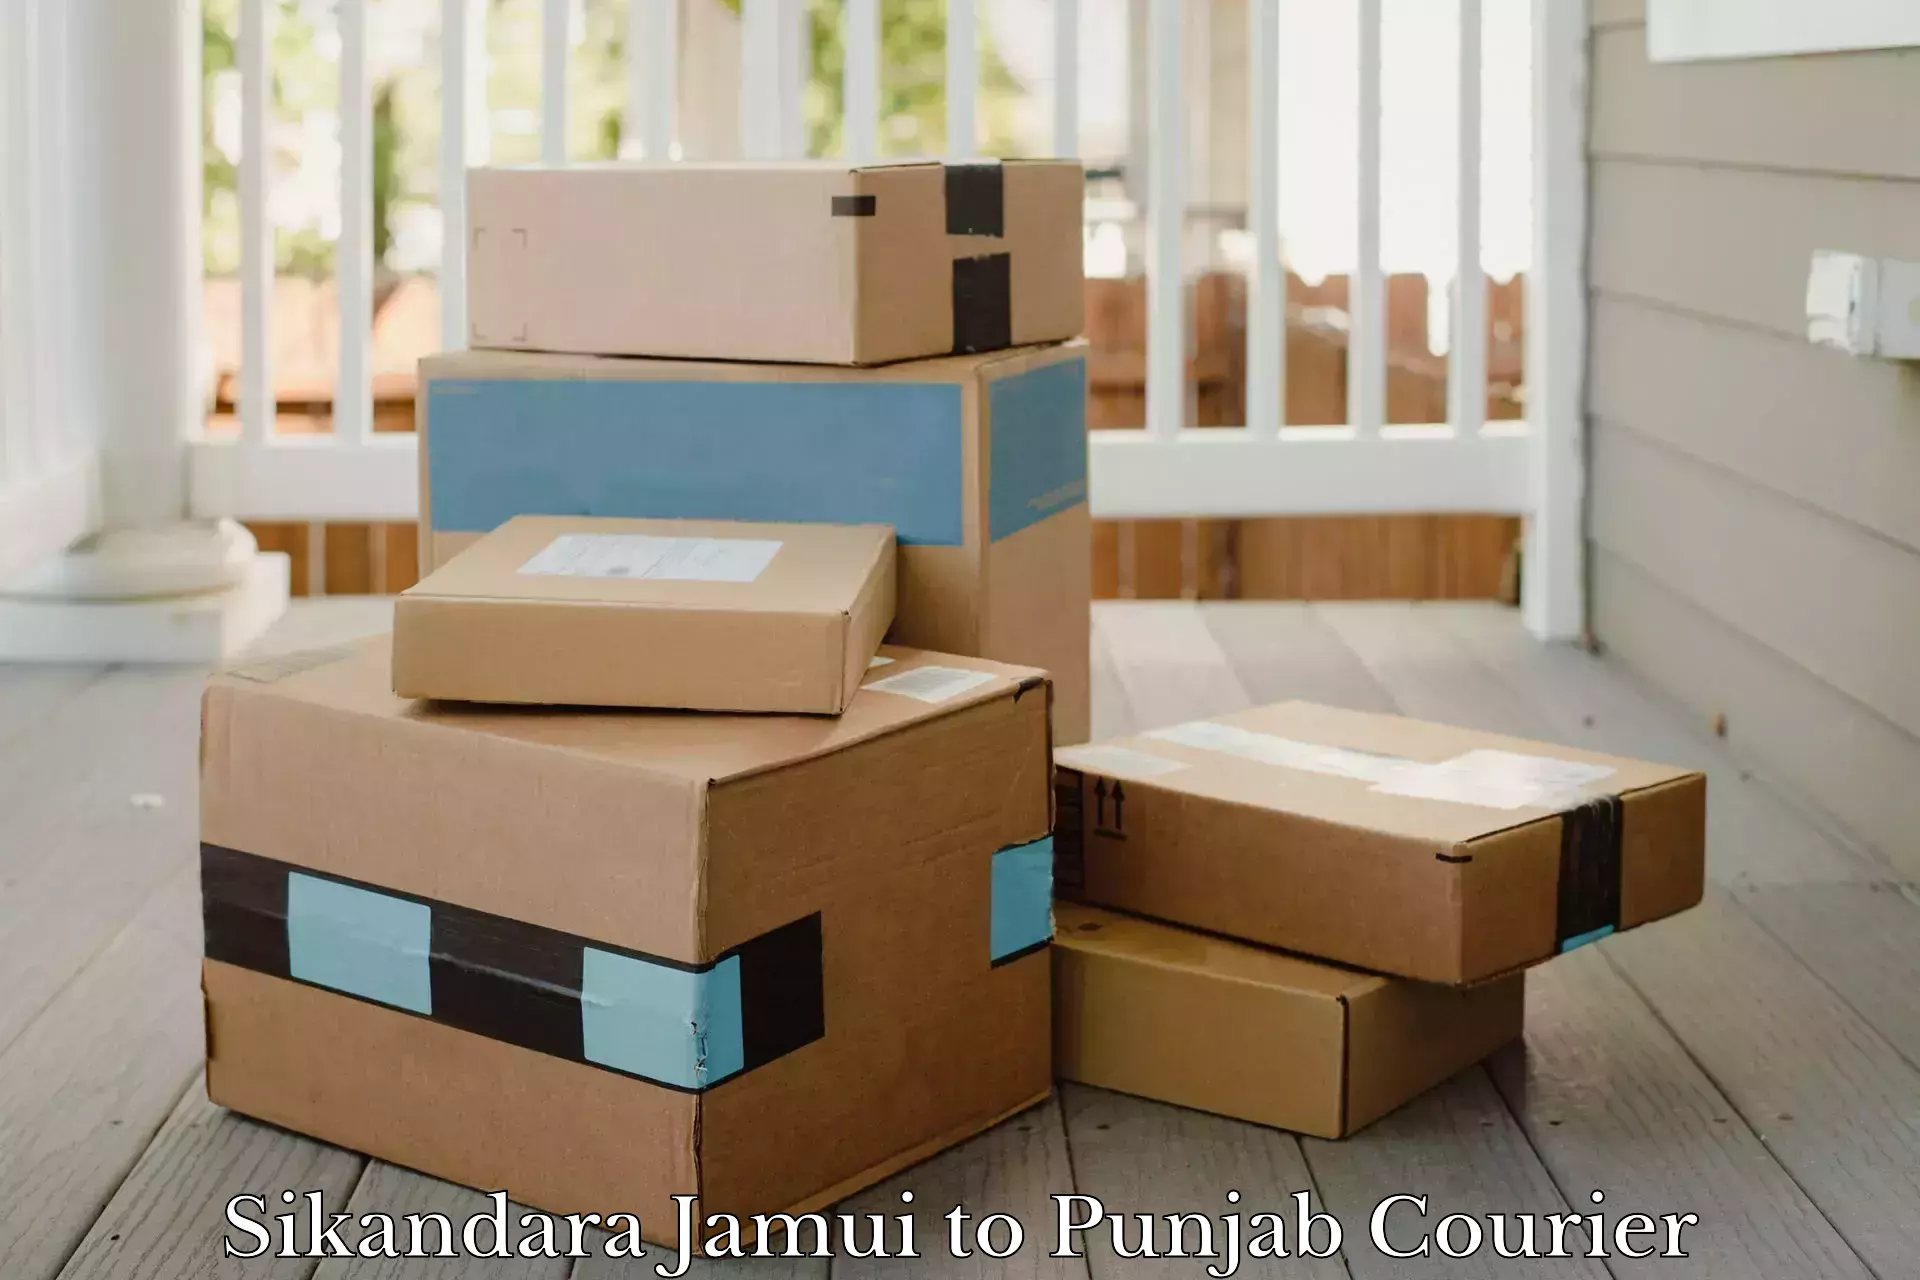 Reliable parcel services Sikandara Jamui to Mohali